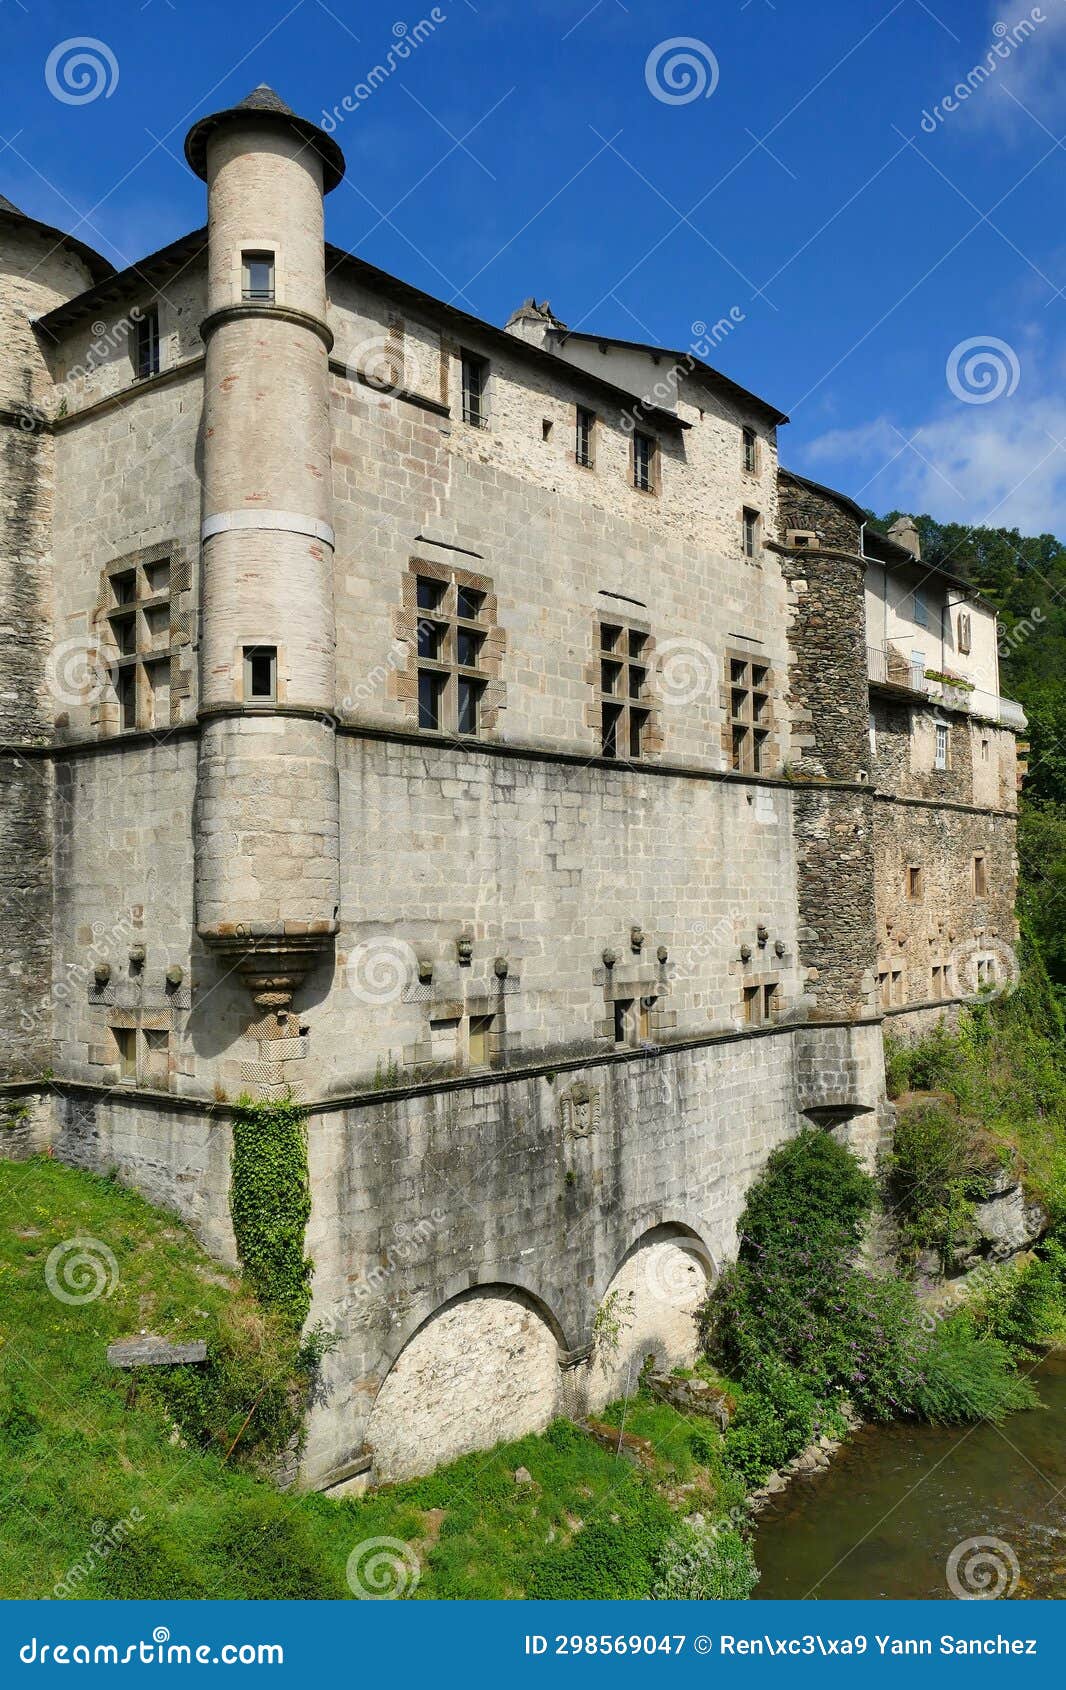 lacaze castle on the banks of the gijou river